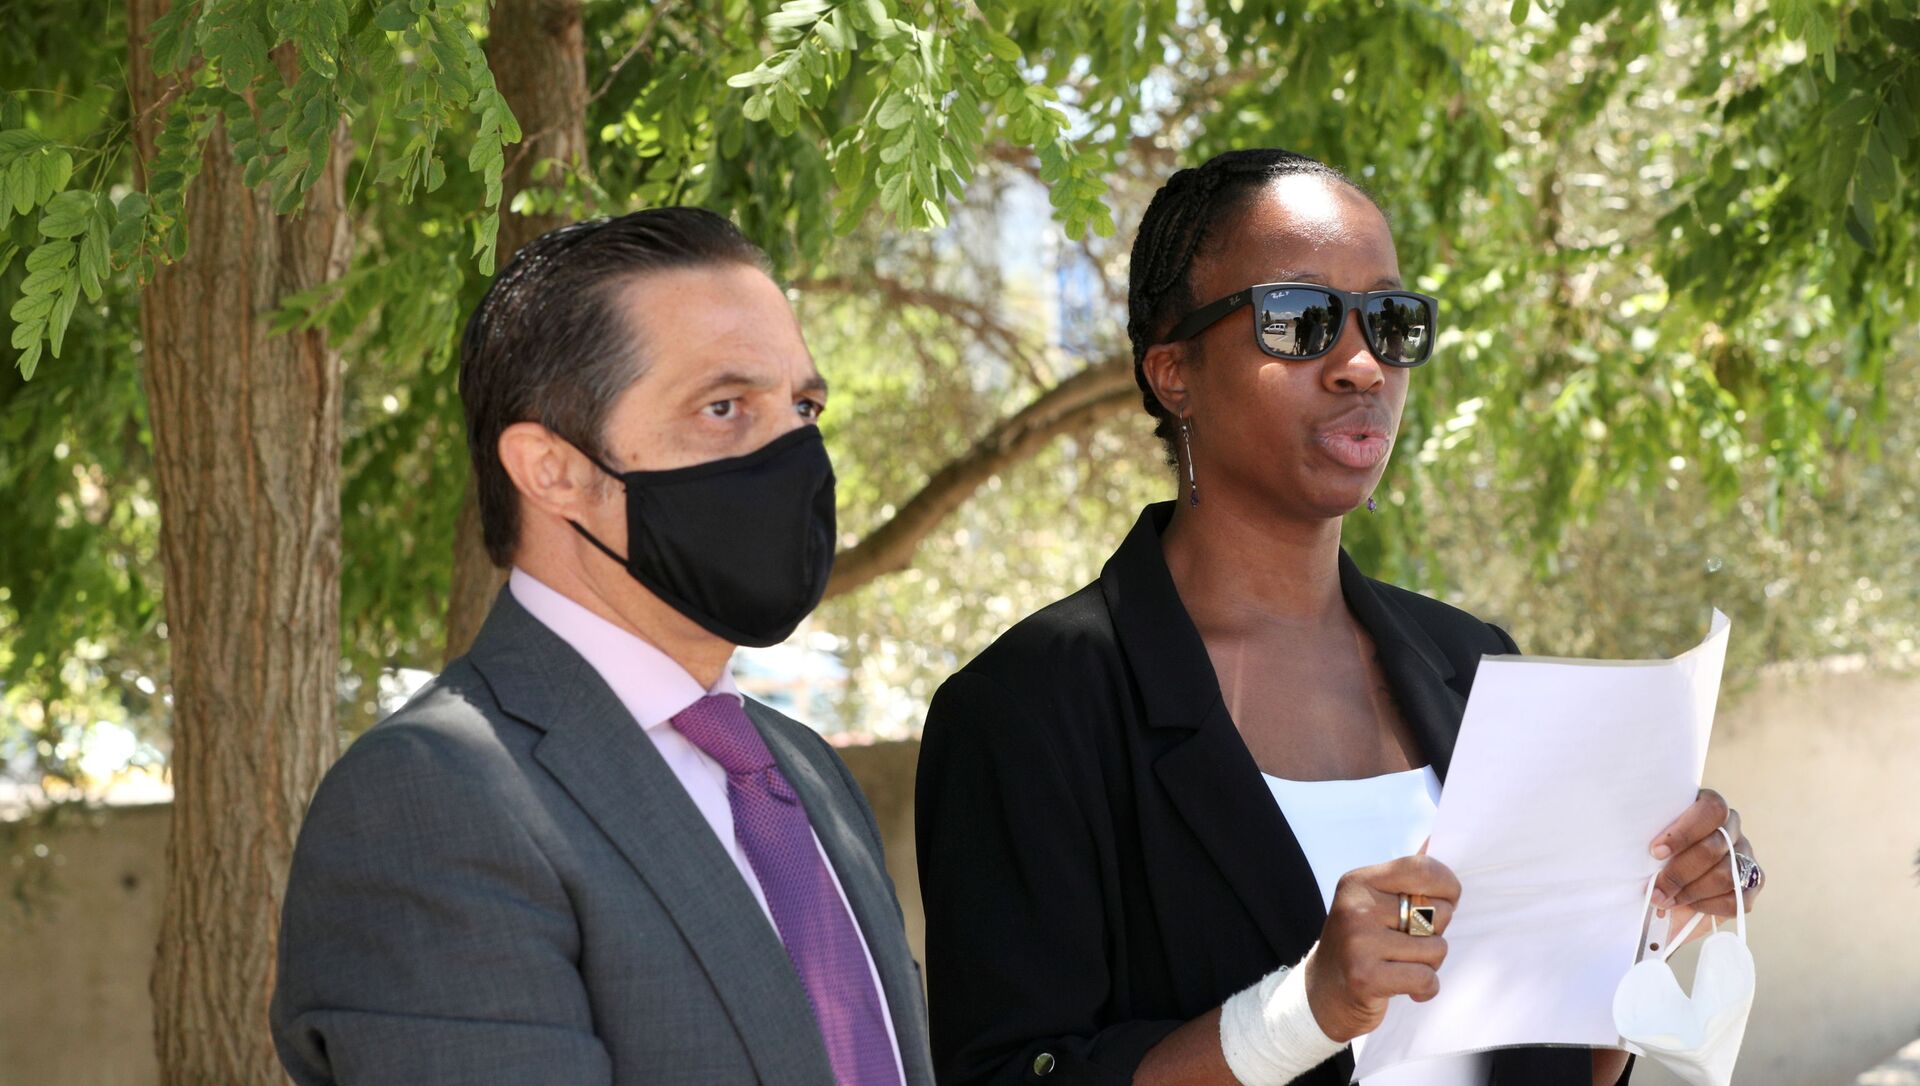 Janice McAfee, a wife of John McAfee, flanked by her lawyer Javier Villalba, speaks to media as she leaves the Brians 2 prison where her husband was found dead in his prison cell after the Spanish high court had authorised his extradition to the U.S., in Sant Esteve Sesrovires, Spain June 25, 2021. - Sputnik International, 1920, 25.06.2021